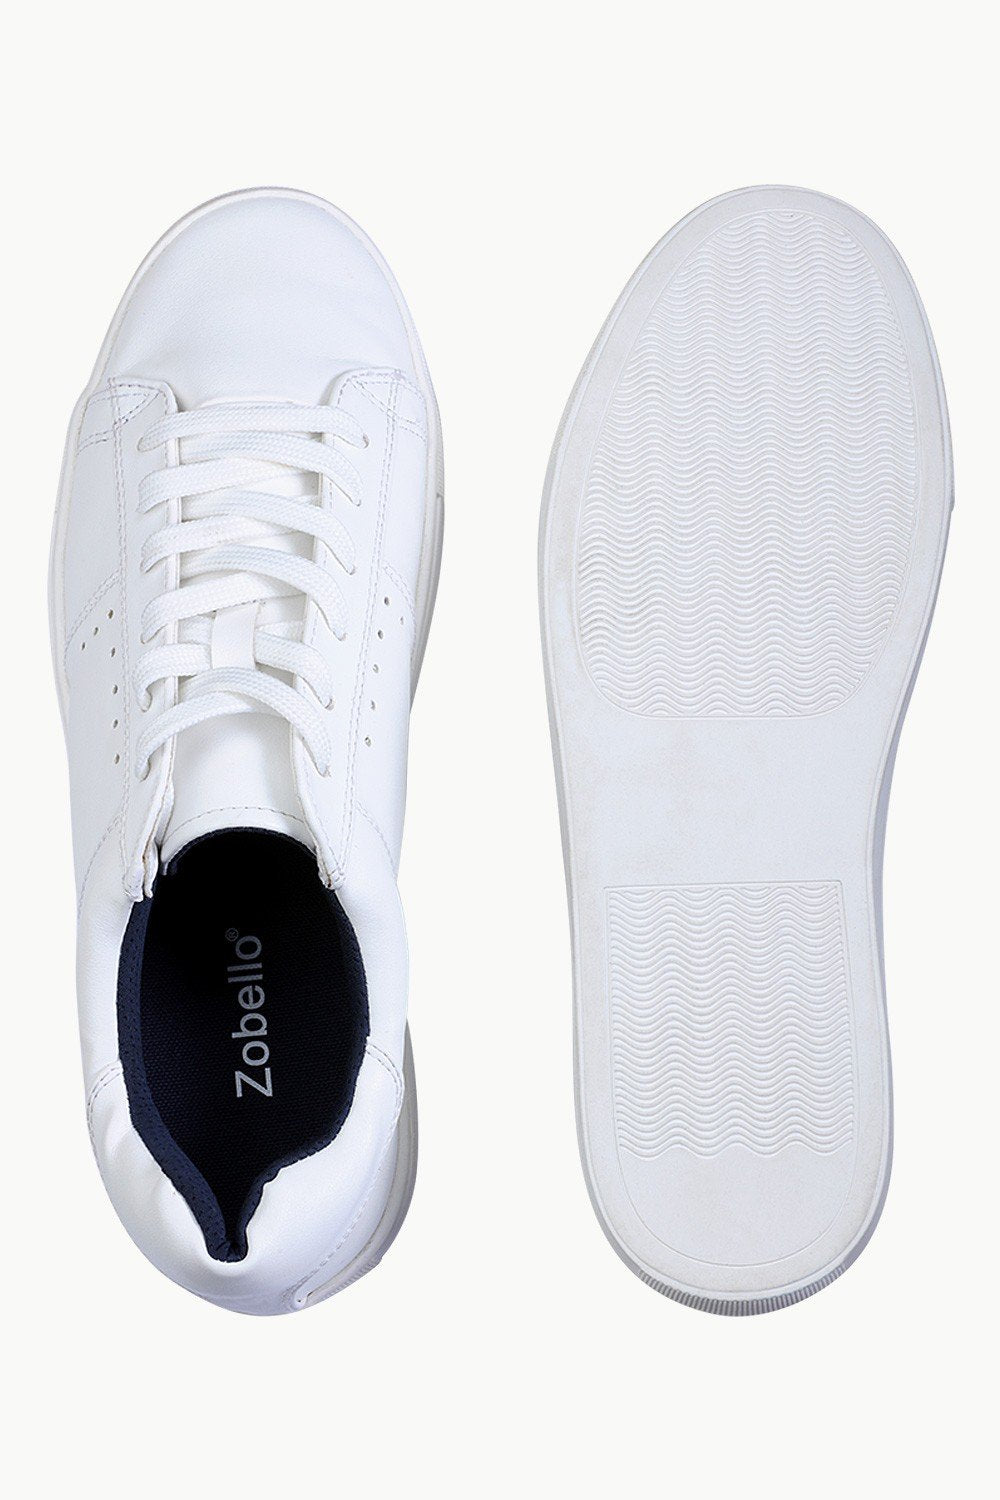 Buy Online Solid White Faux Leather Lace Up Plimsolls for Men Online ...